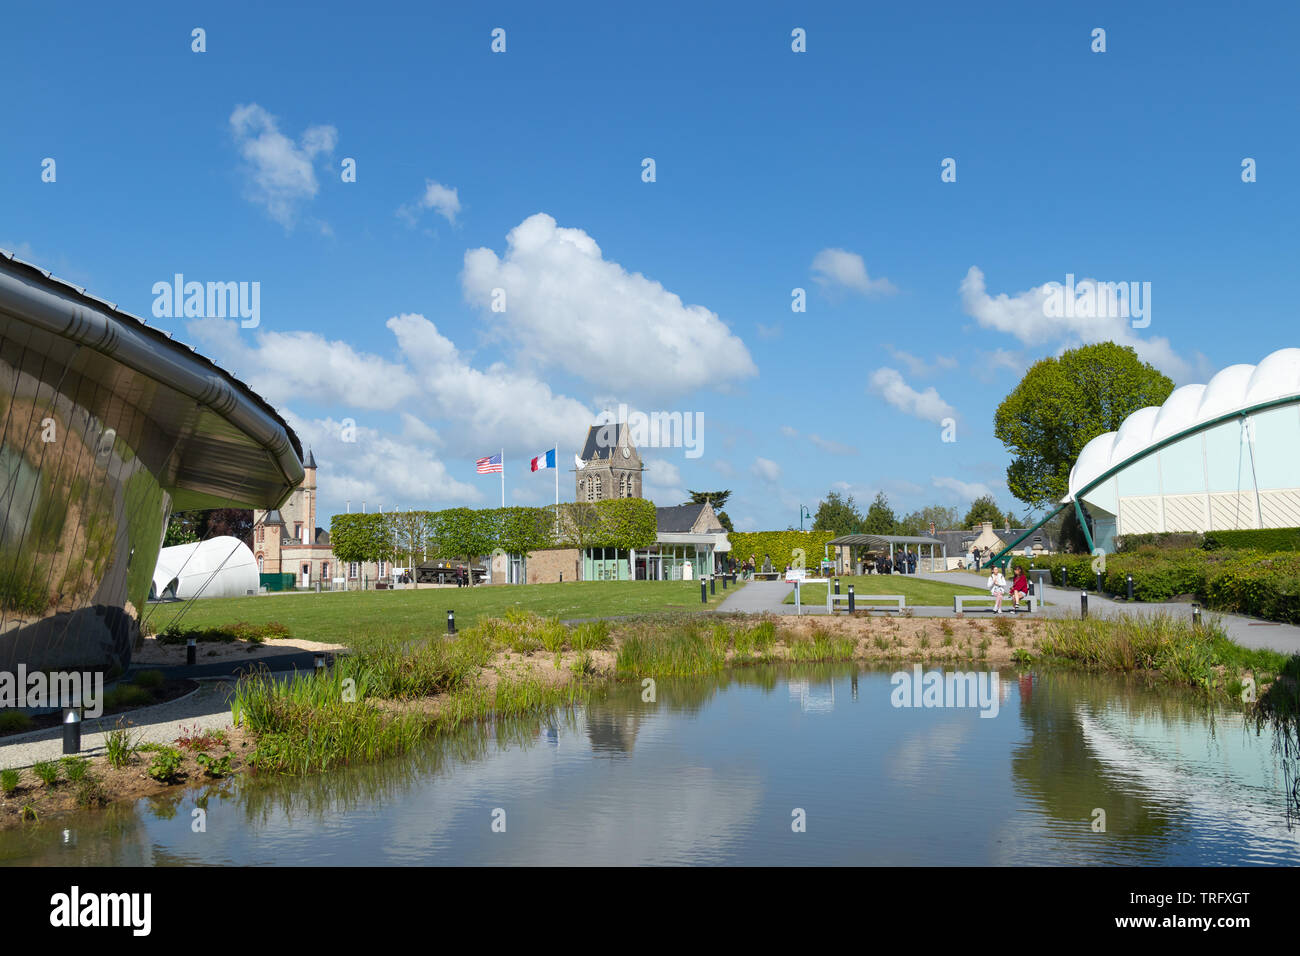 sainte mere eglise, France - May 5, 2019: View from the Airborne museum on the town and church of sainte mere eglise. Stock Photo